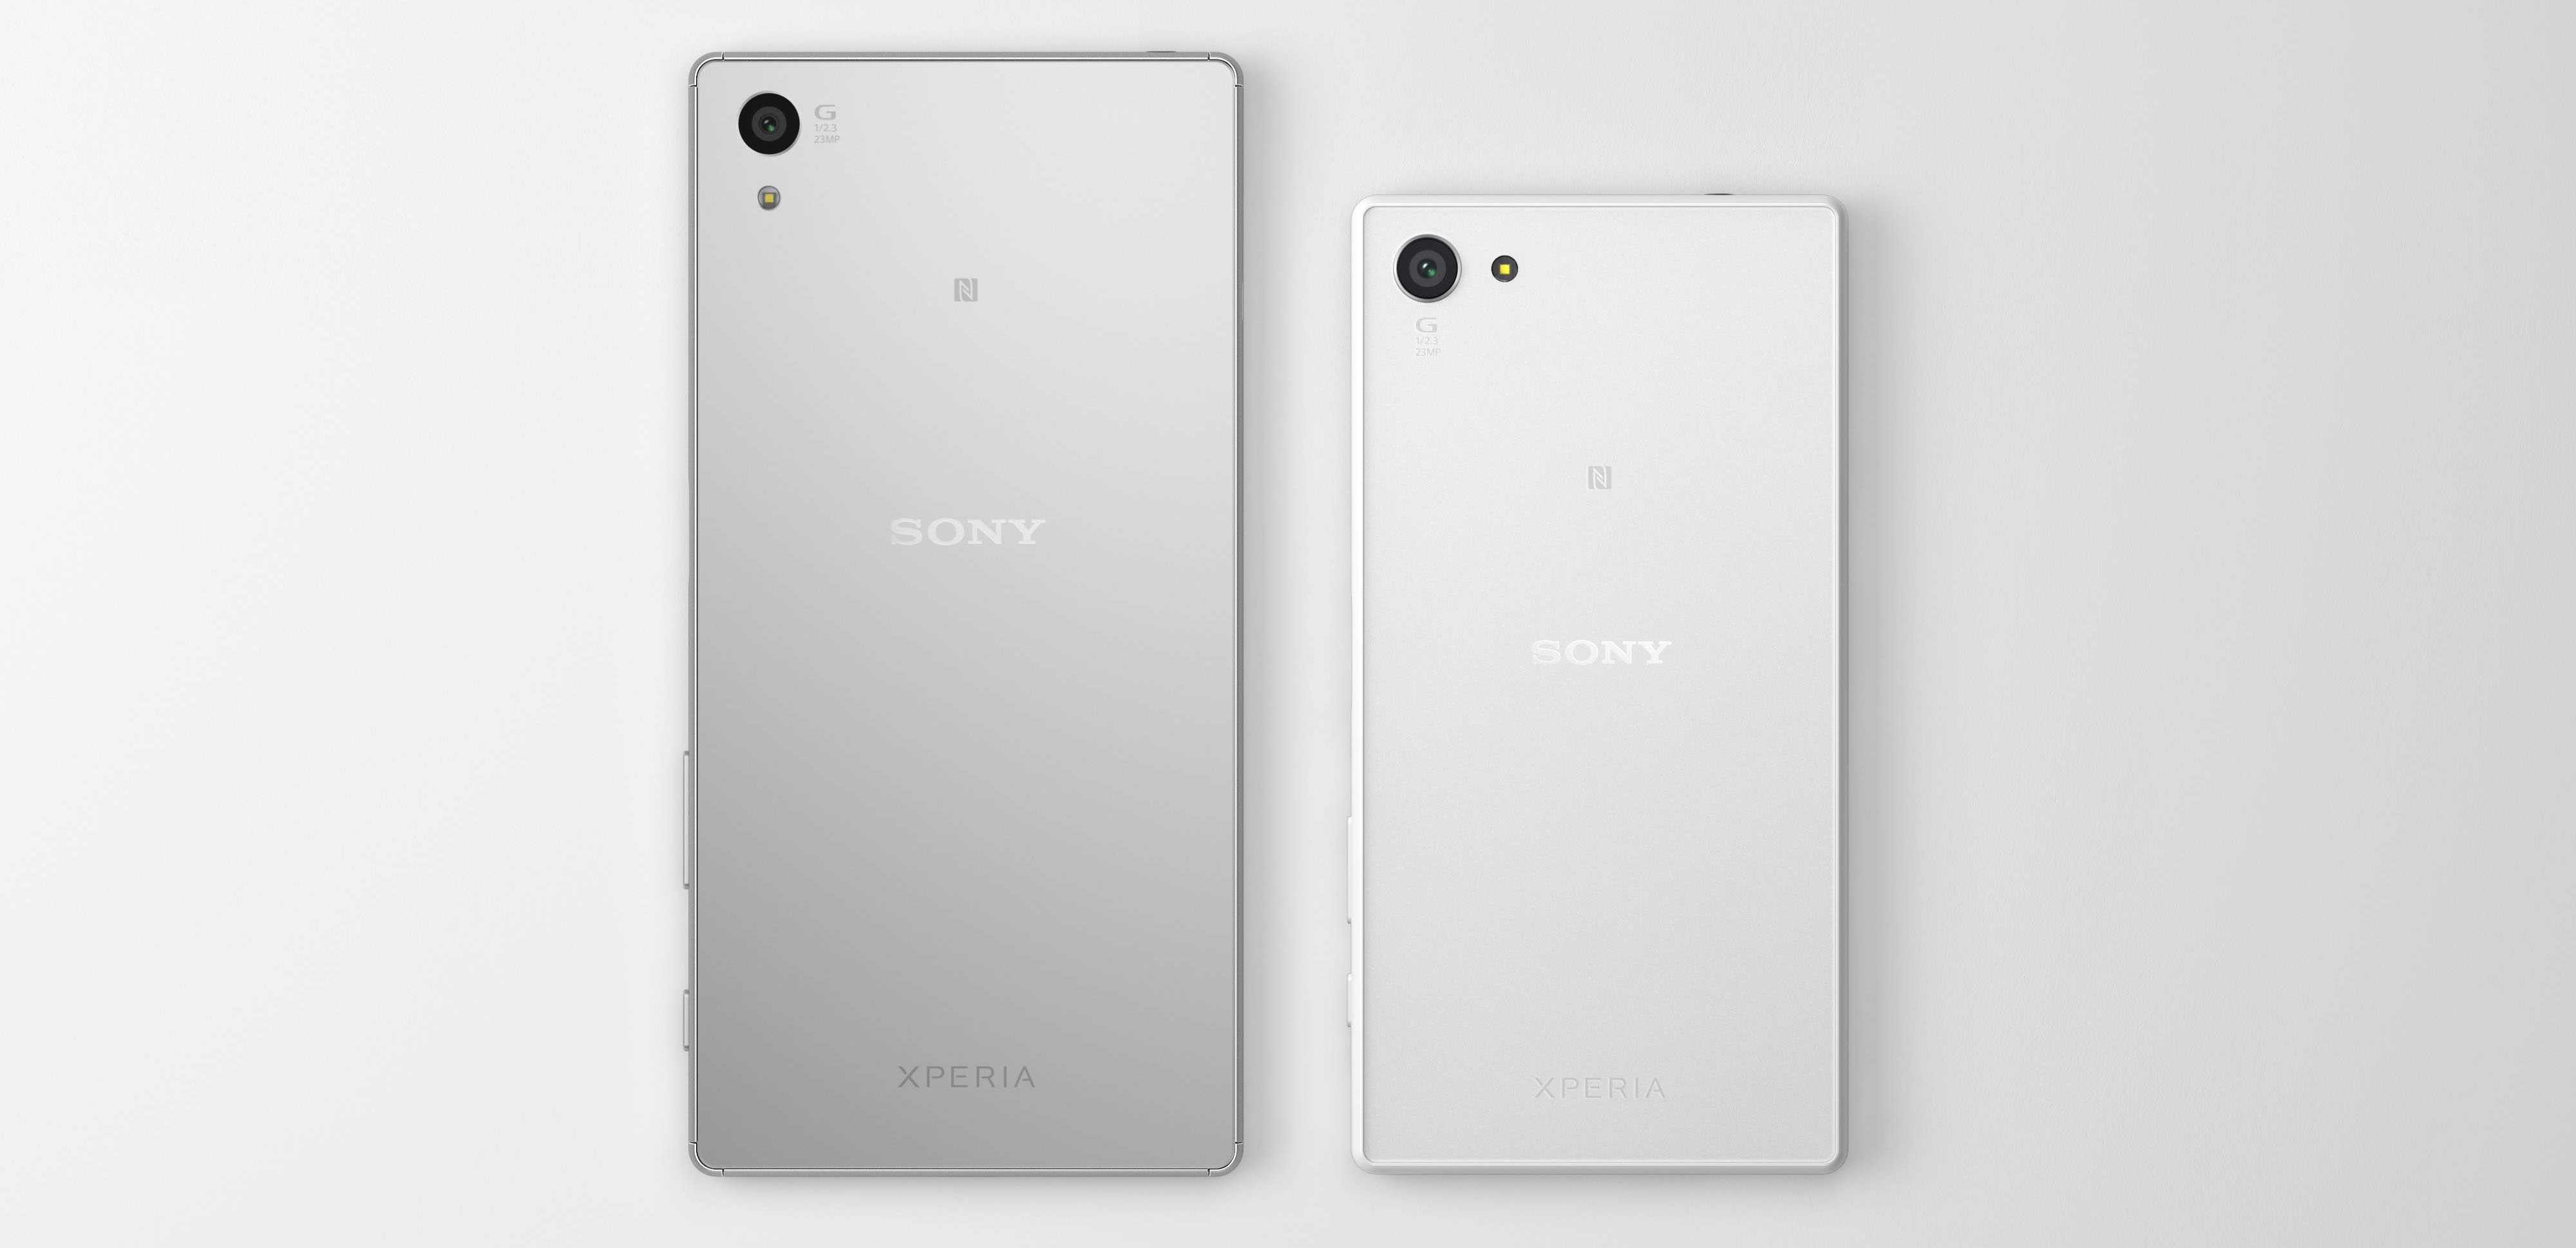 Uitgestorven ik zal sterk zijn band Sony Launches The Xperia Z5, Z5 Compact, and Z5 Premium With UHD Display